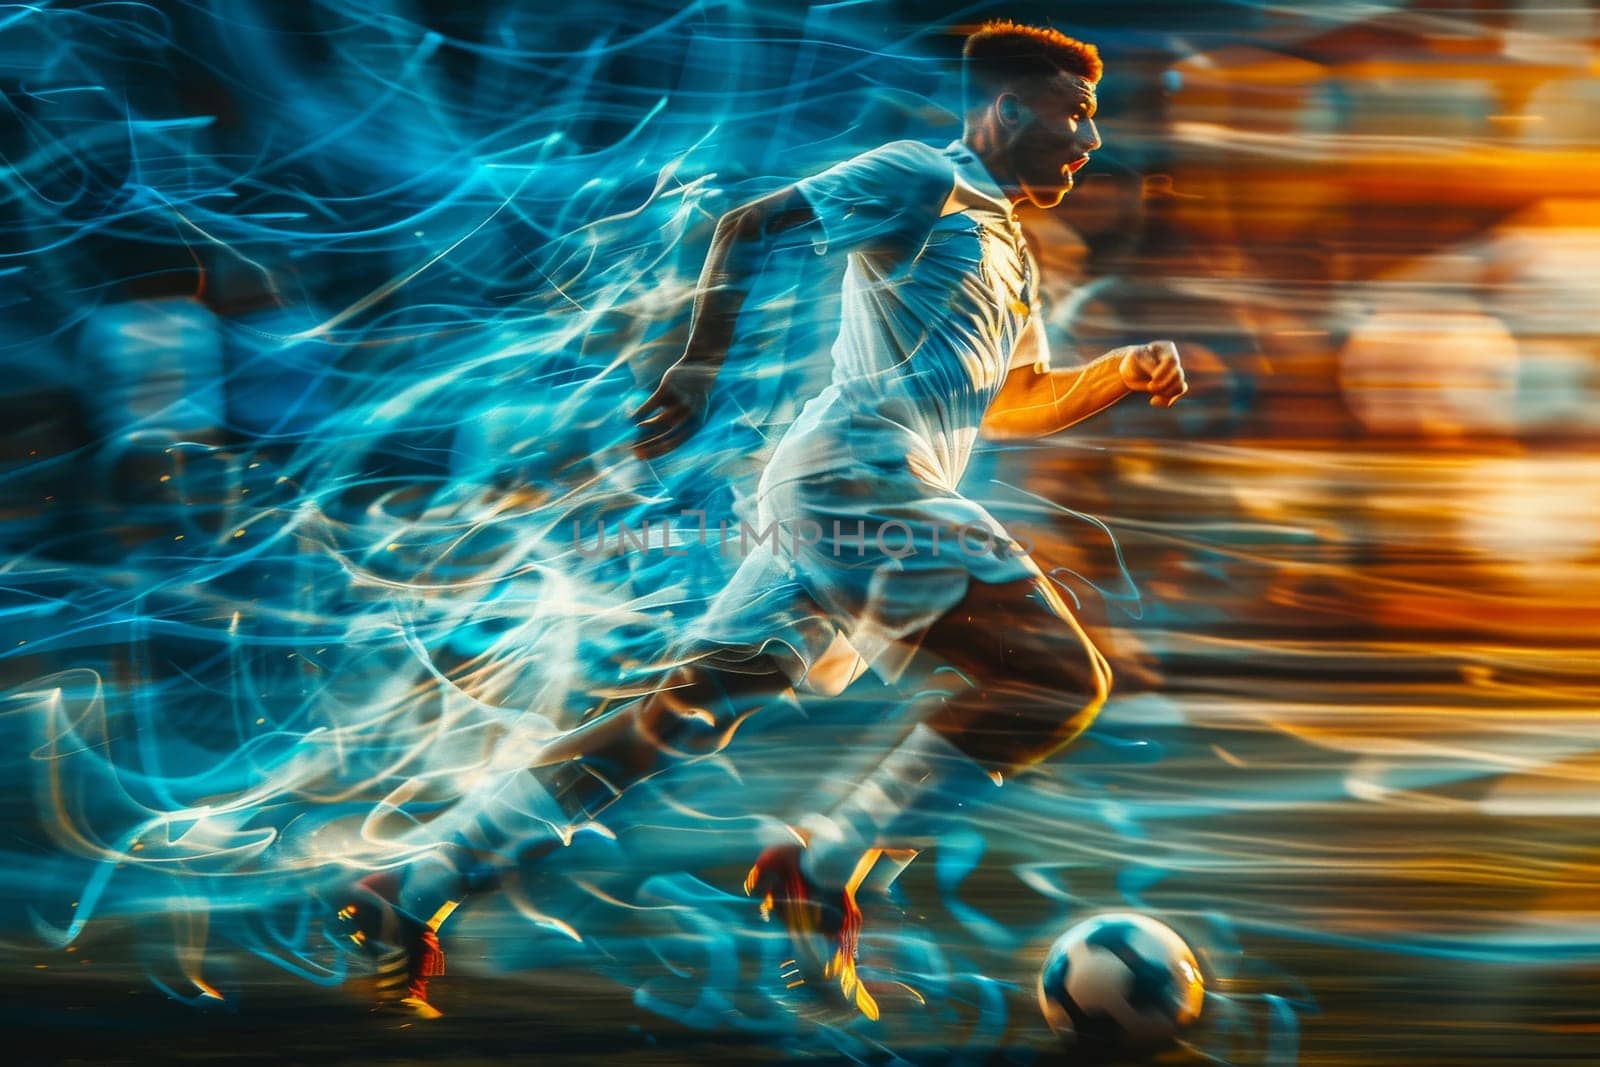 A soccer player is kicking a ball on a field with a blue and orange background by itchaznong